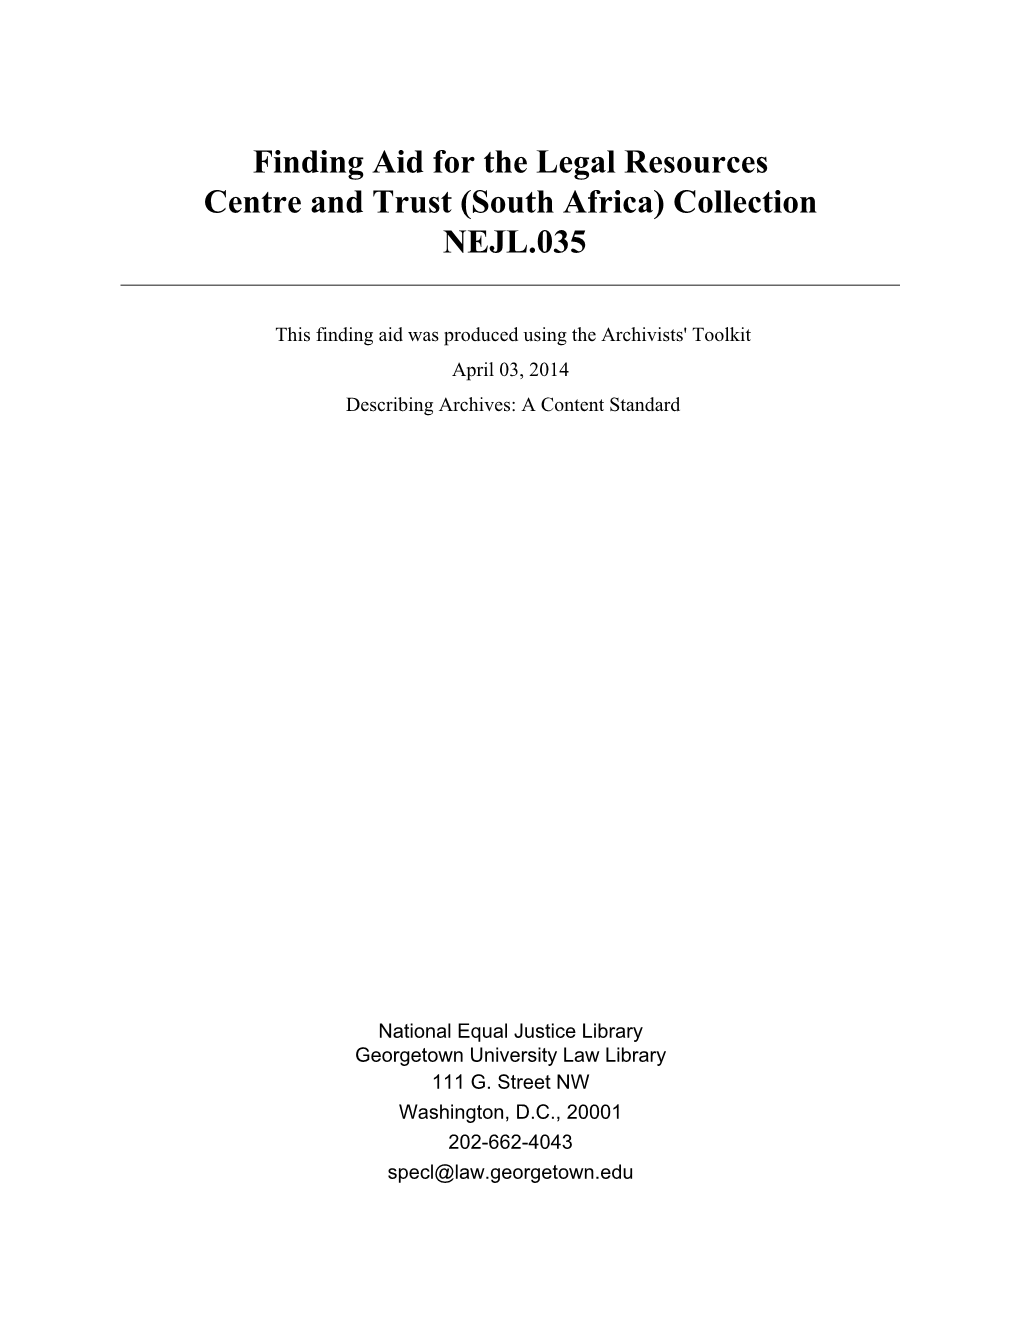 Finding Aid for the Legal Resources Centre and Trust (South Africa) Collection NEJL.035